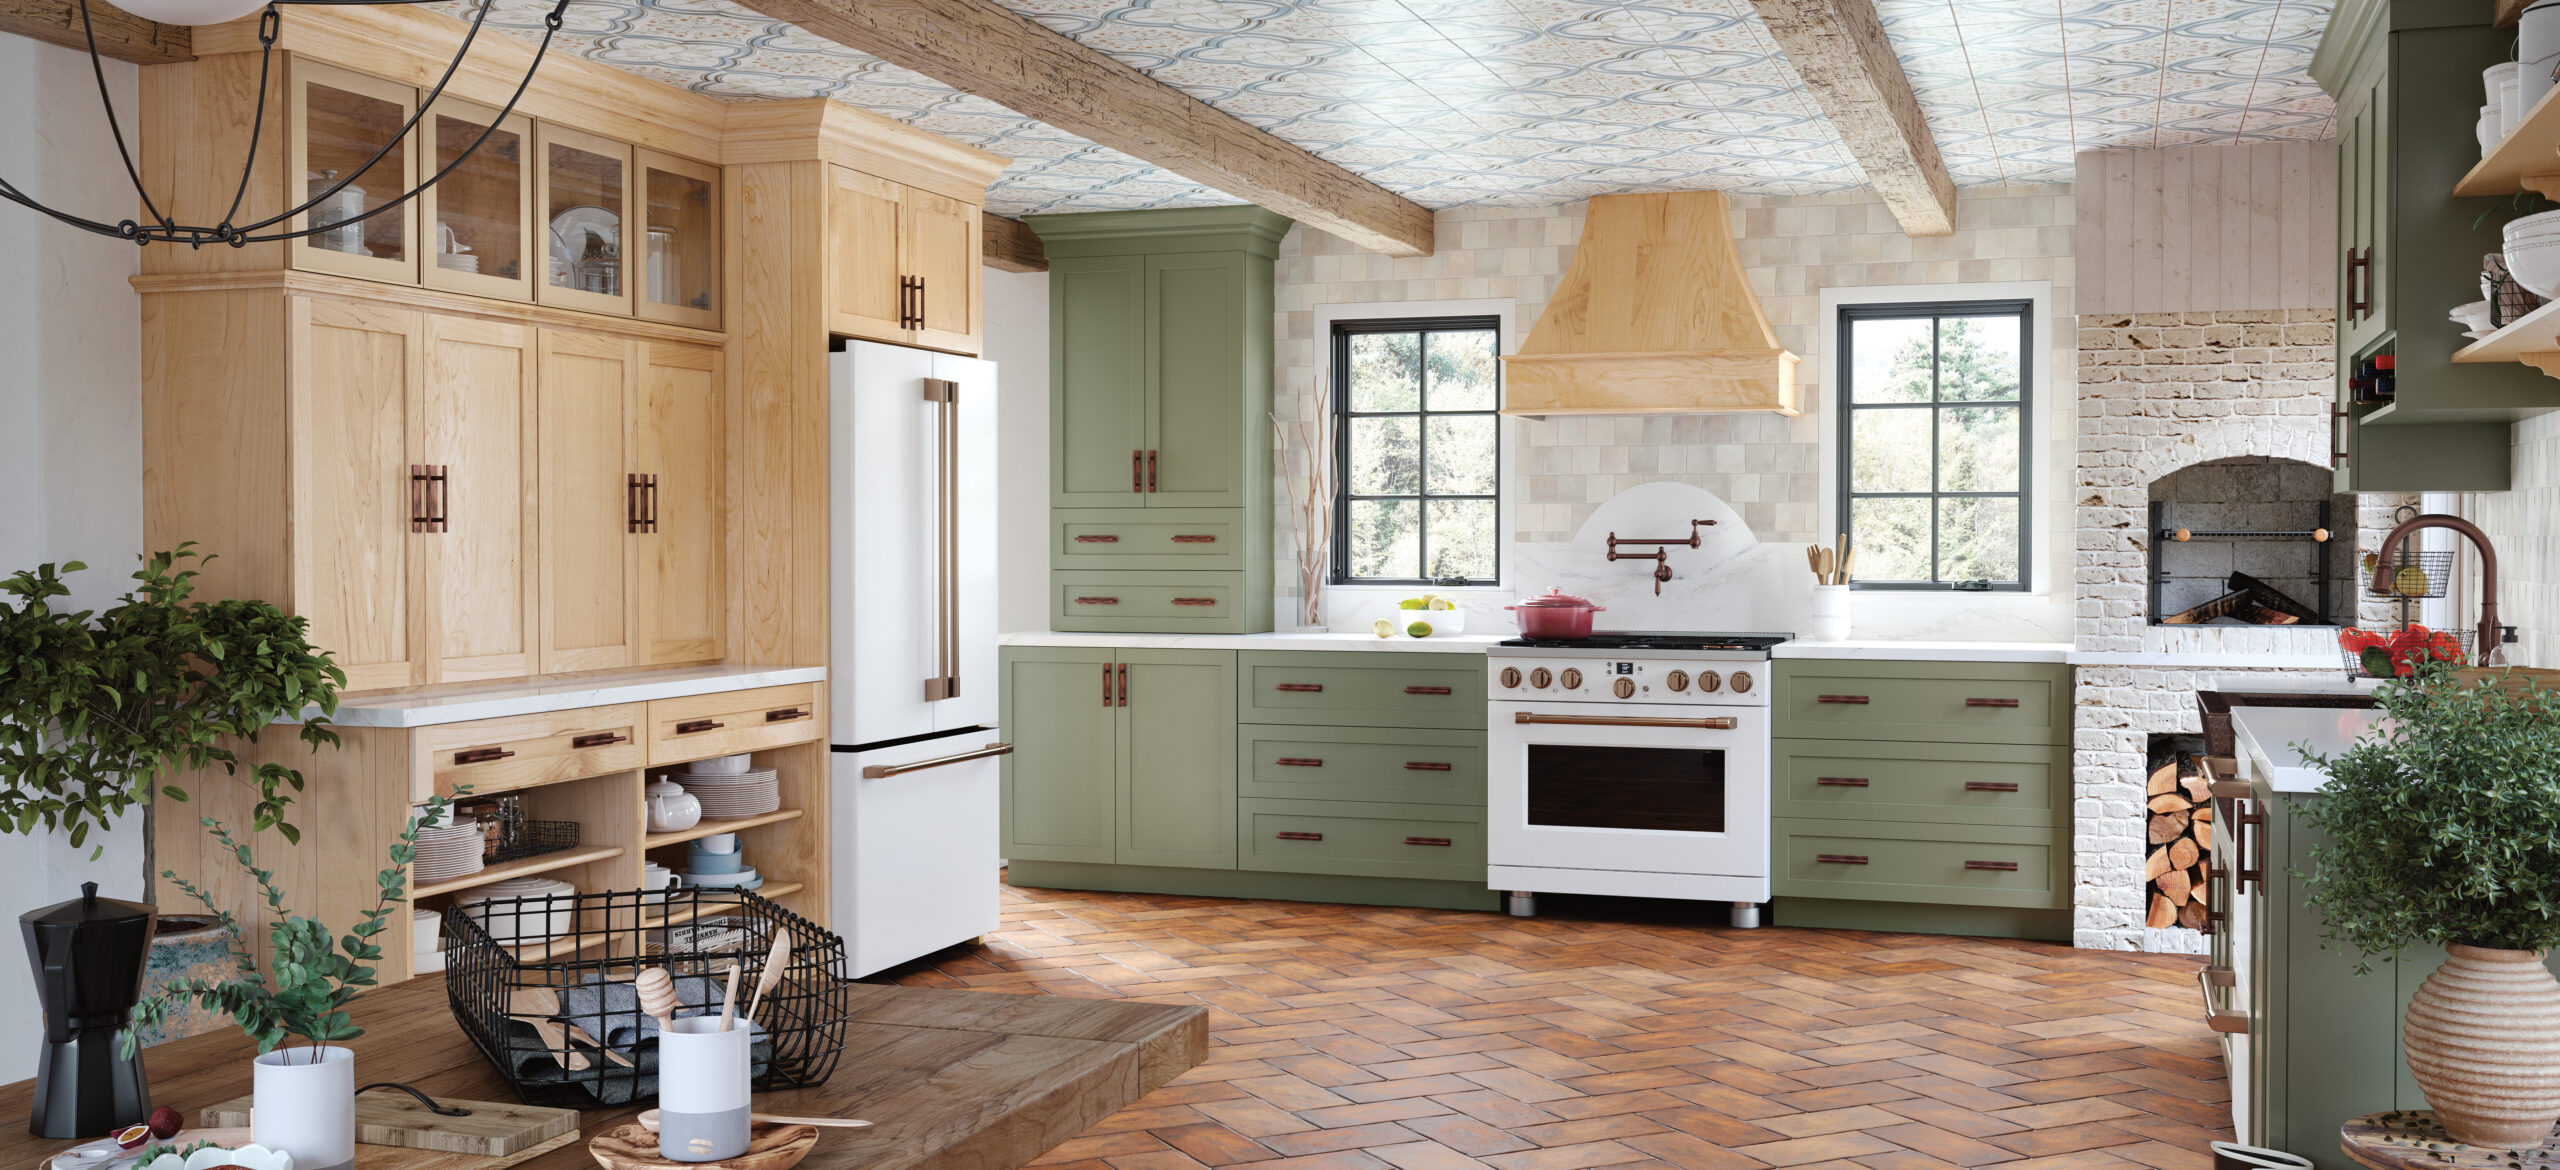 Cozy Charm: Creating an English Country Kitchen that Feels Like Home